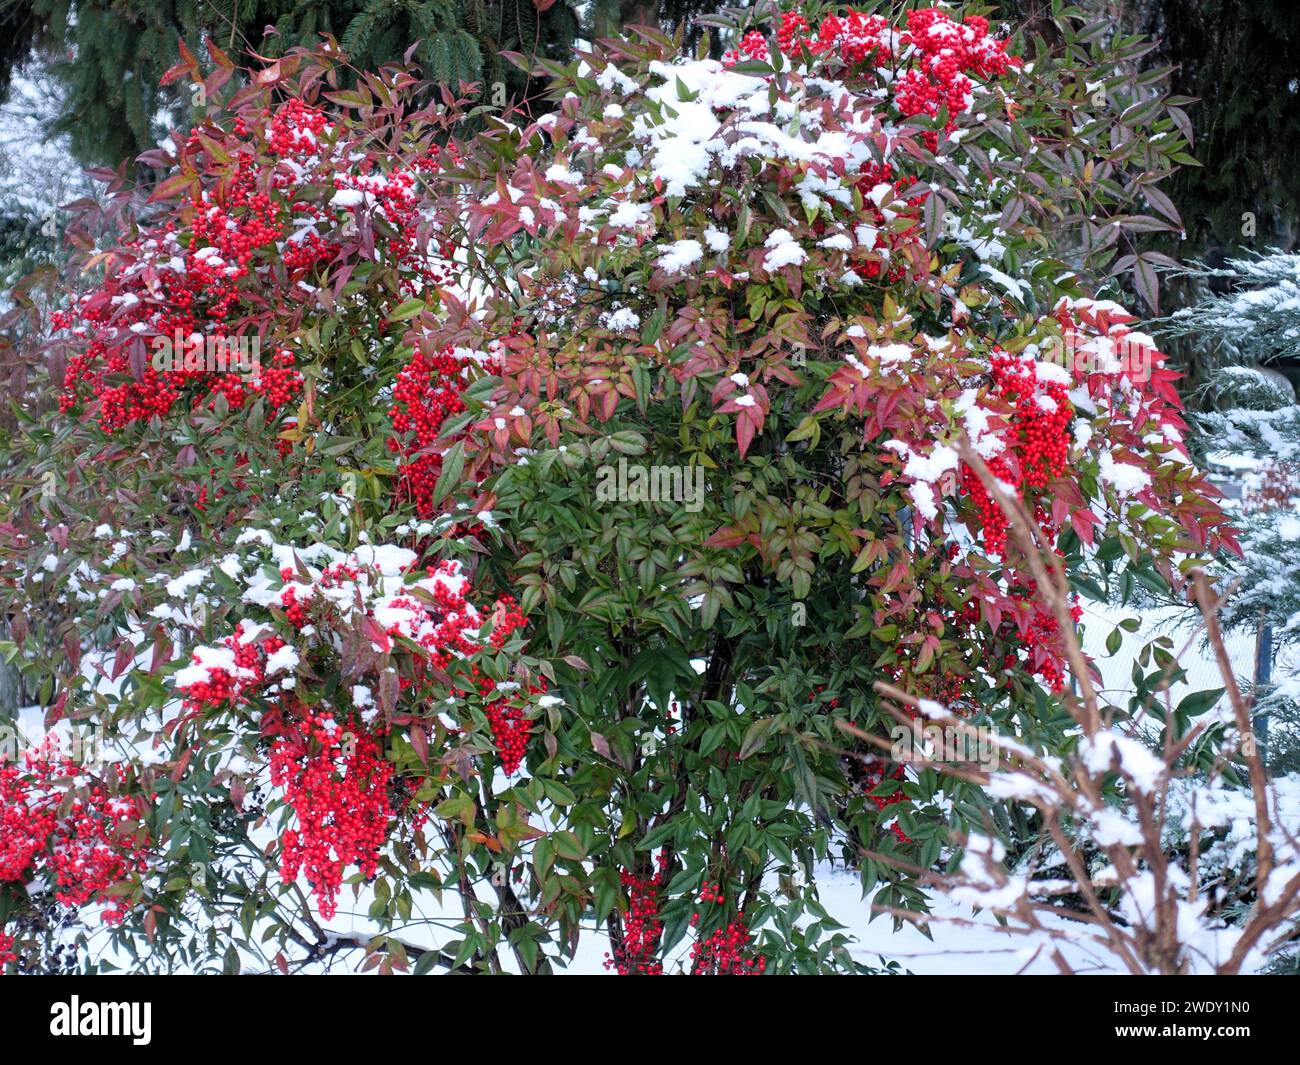 Flowering shrub adorned with snow and berries in a wintry garden Stock Photo